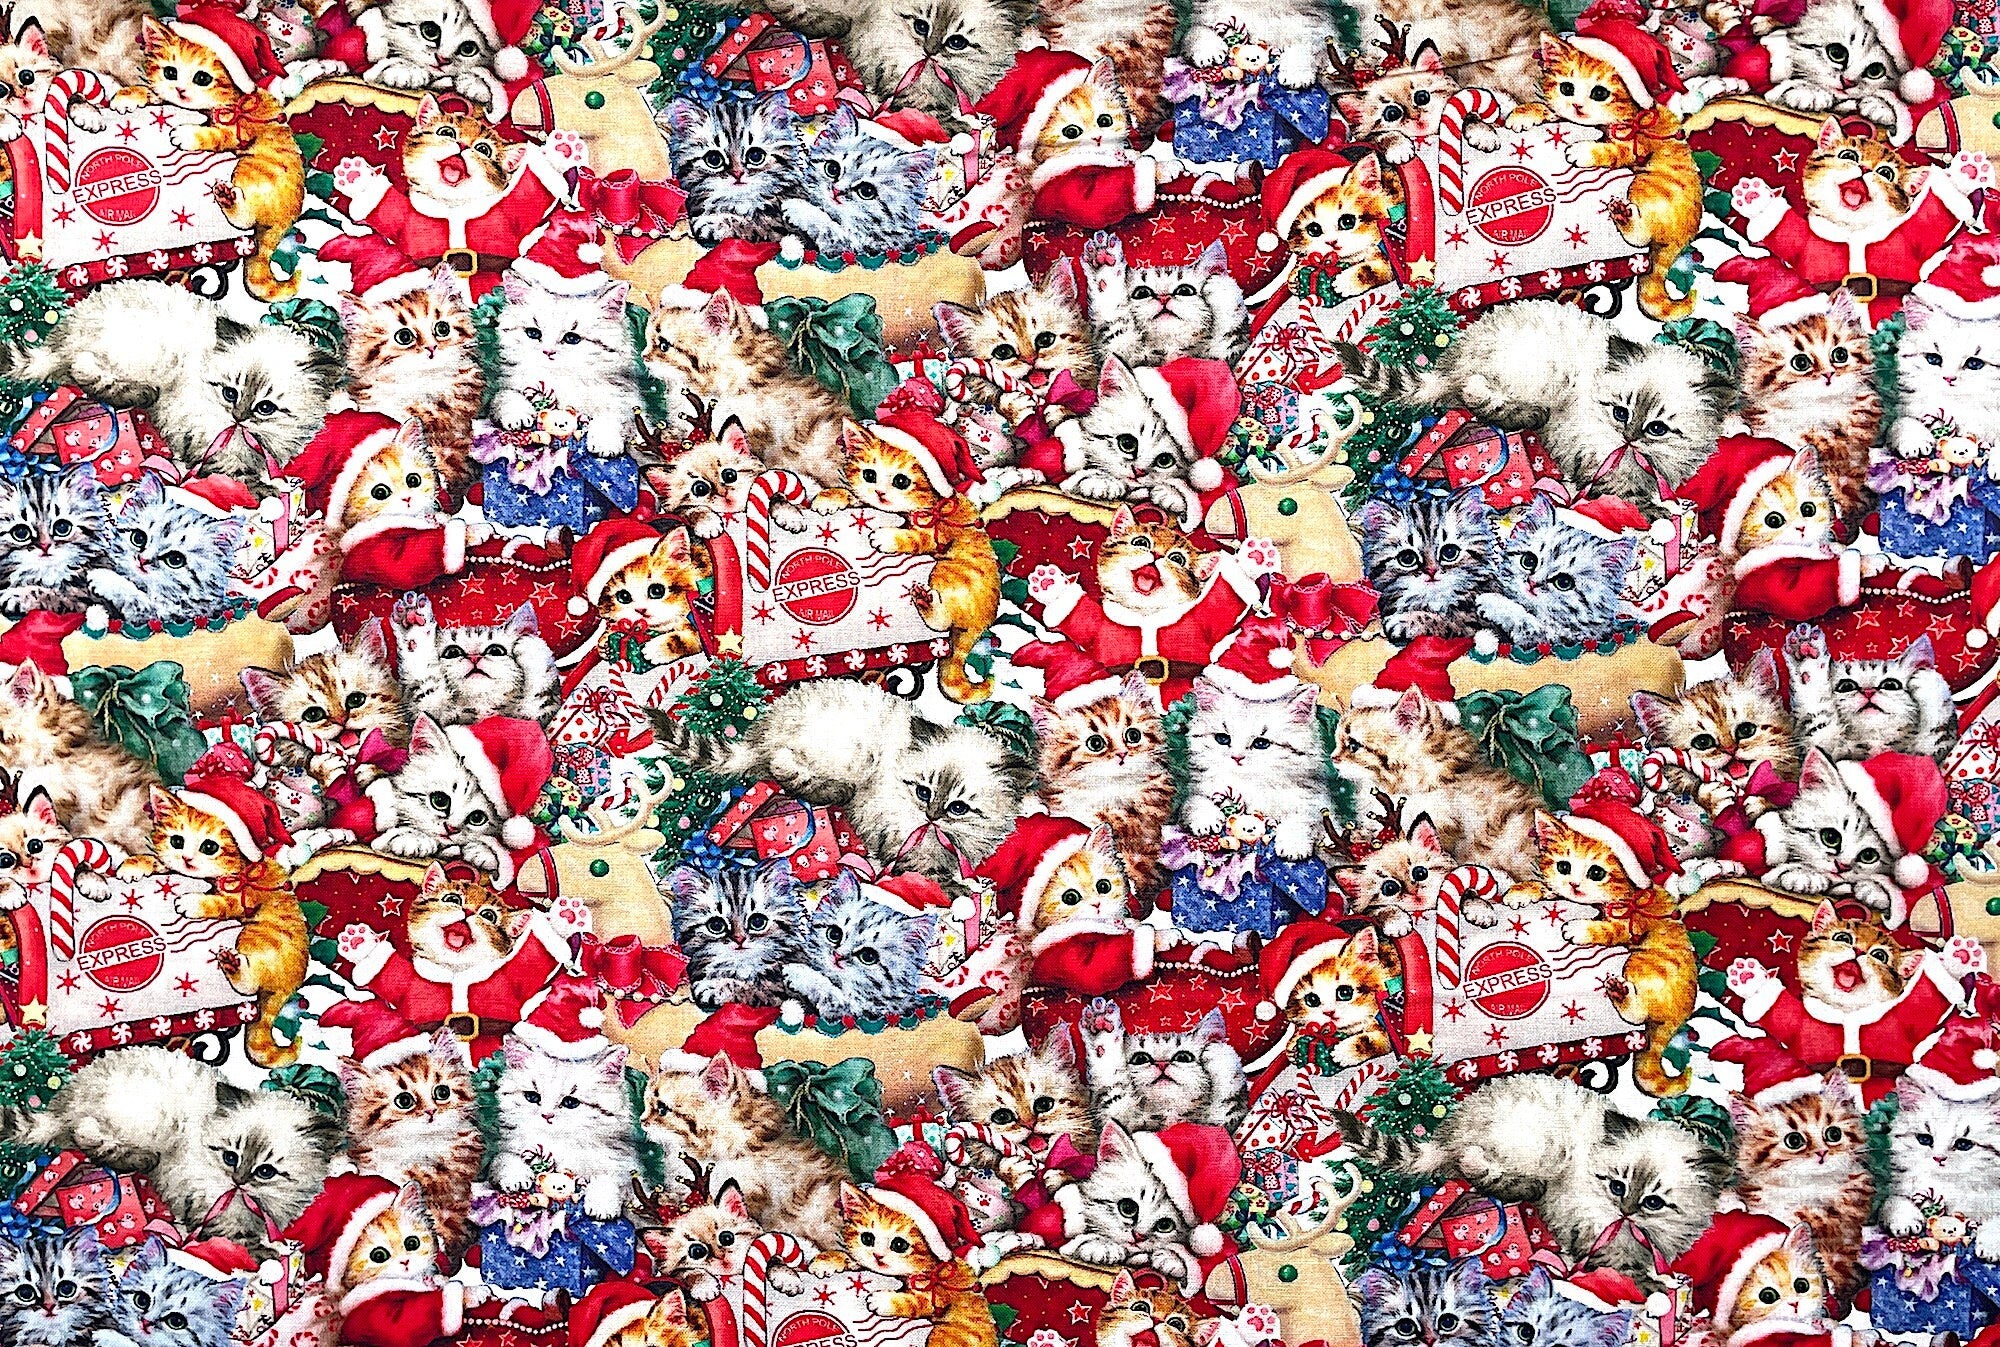 Cotton fabric covered with Kittens, most are wearing Santa hats.